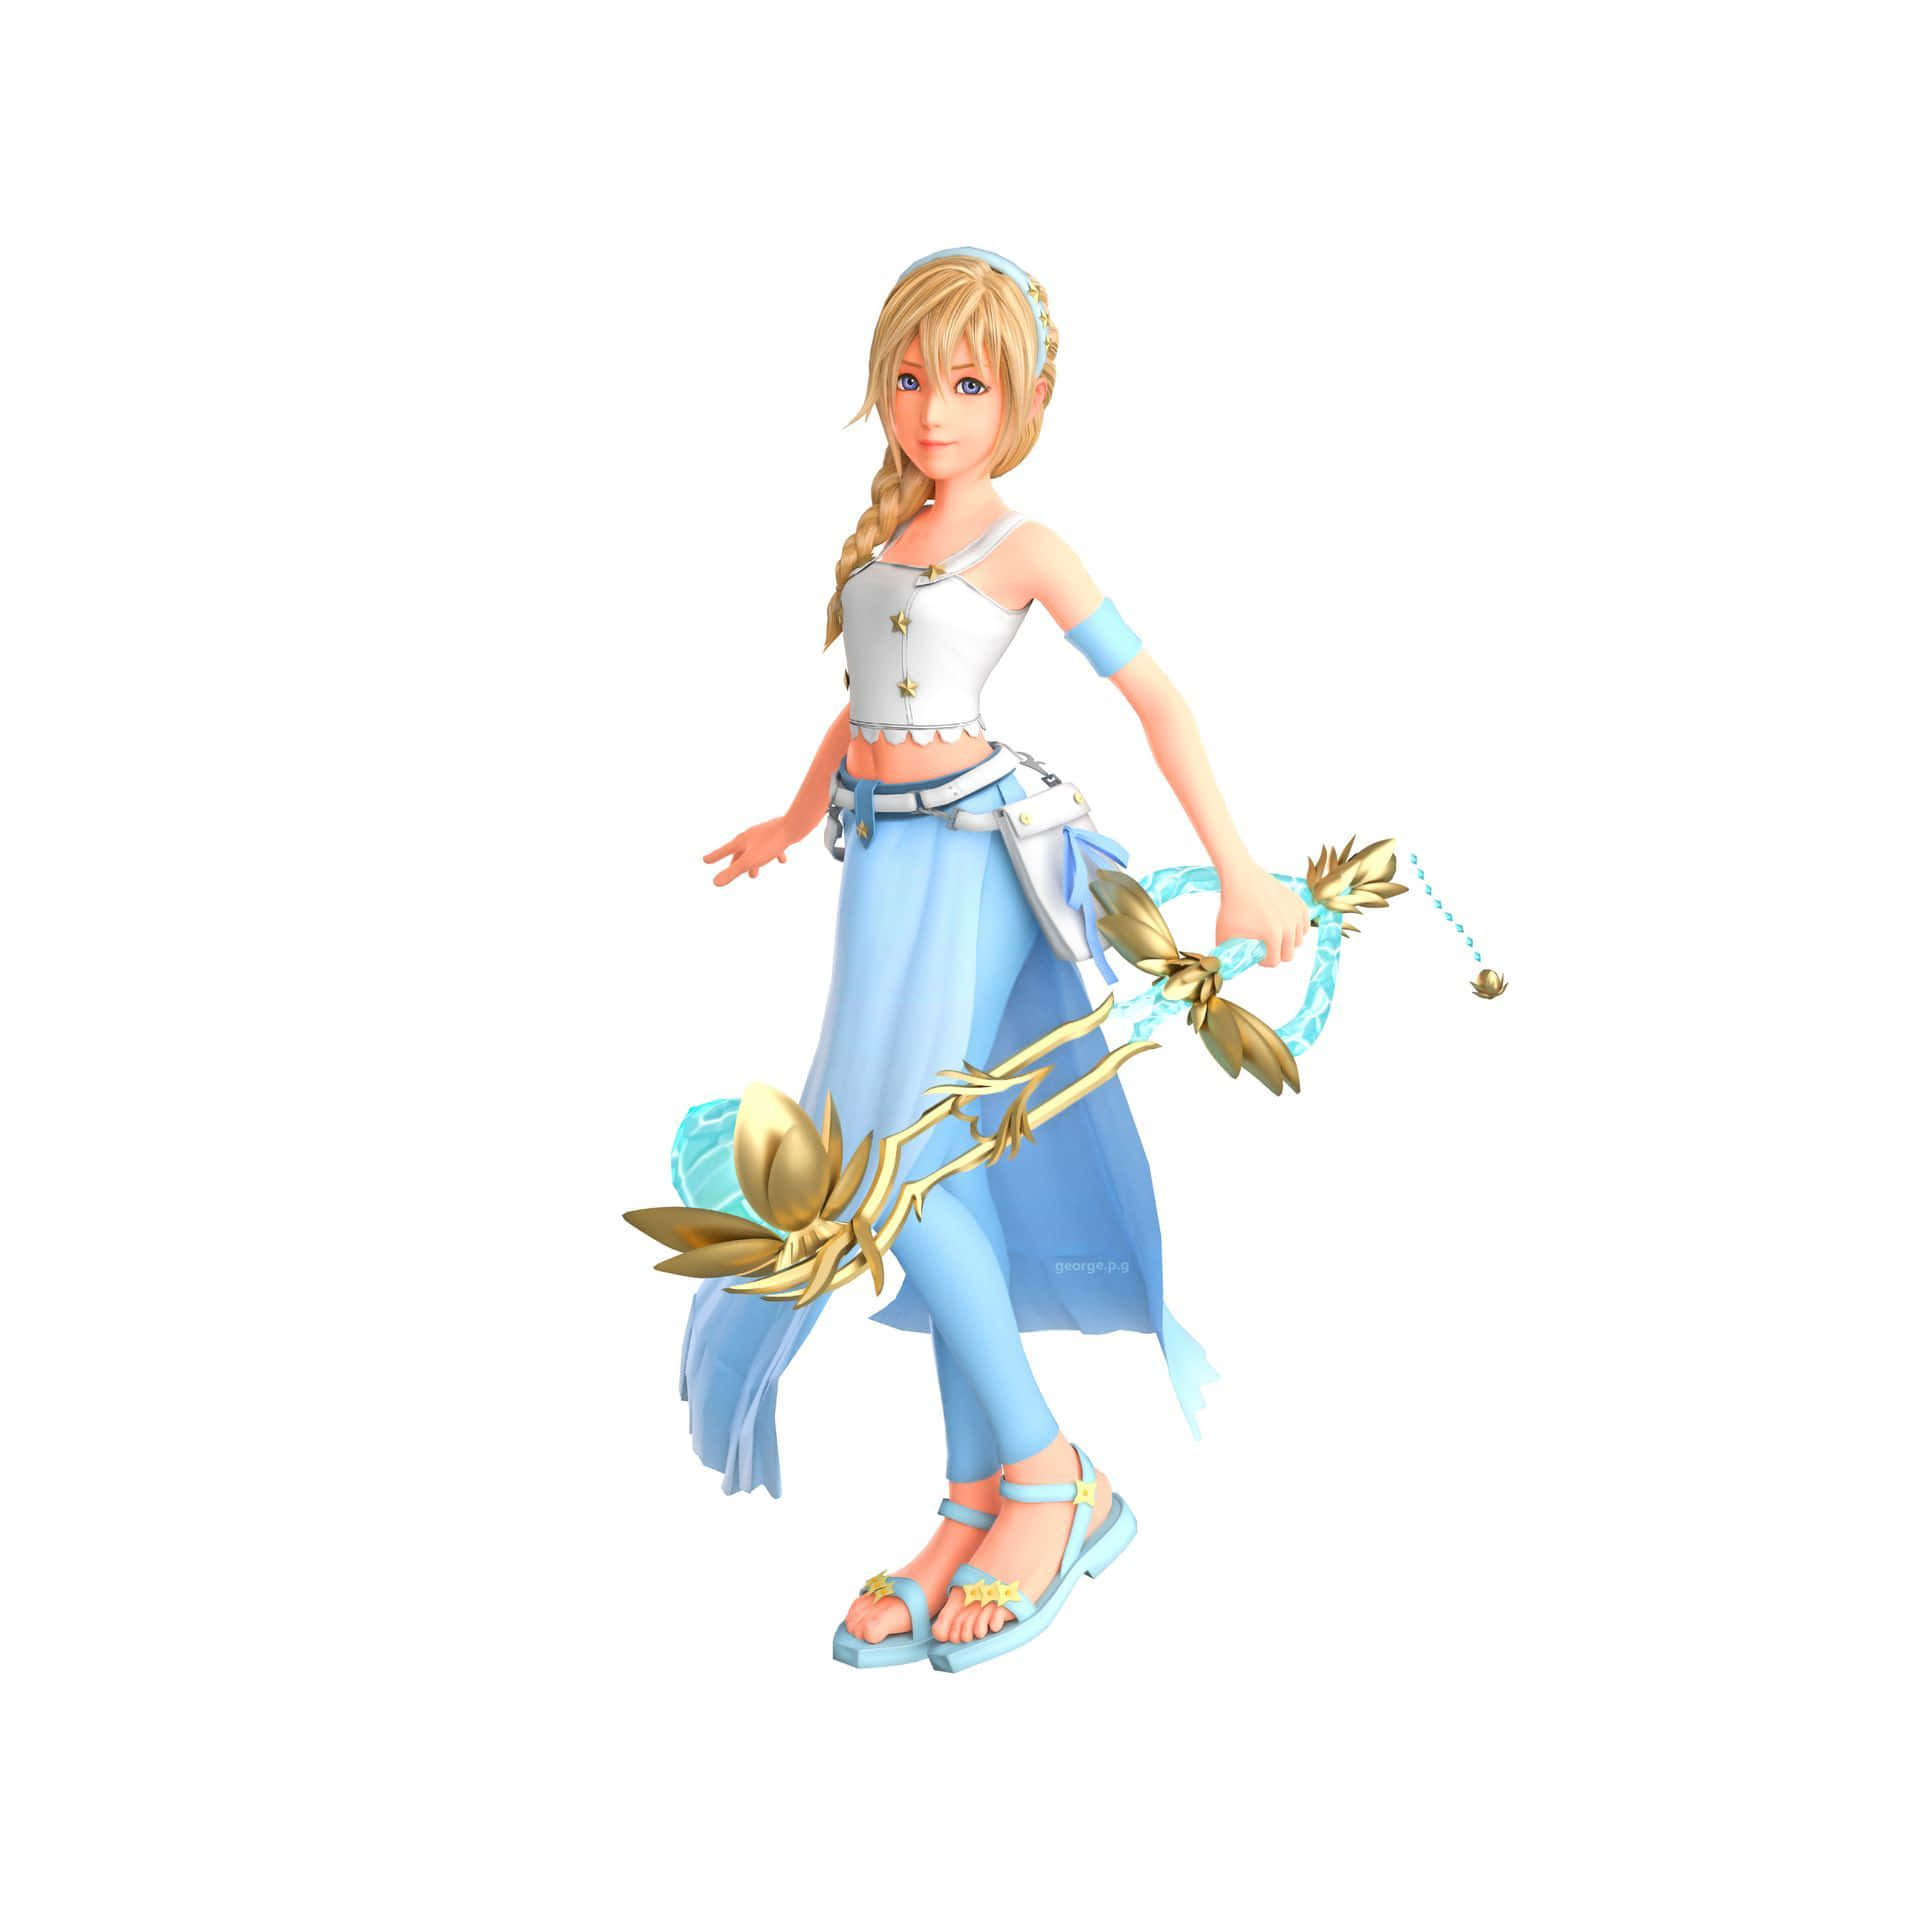 Namine from Kingdom Hearts standing in a serene and dreamy landscape. Wallpaper